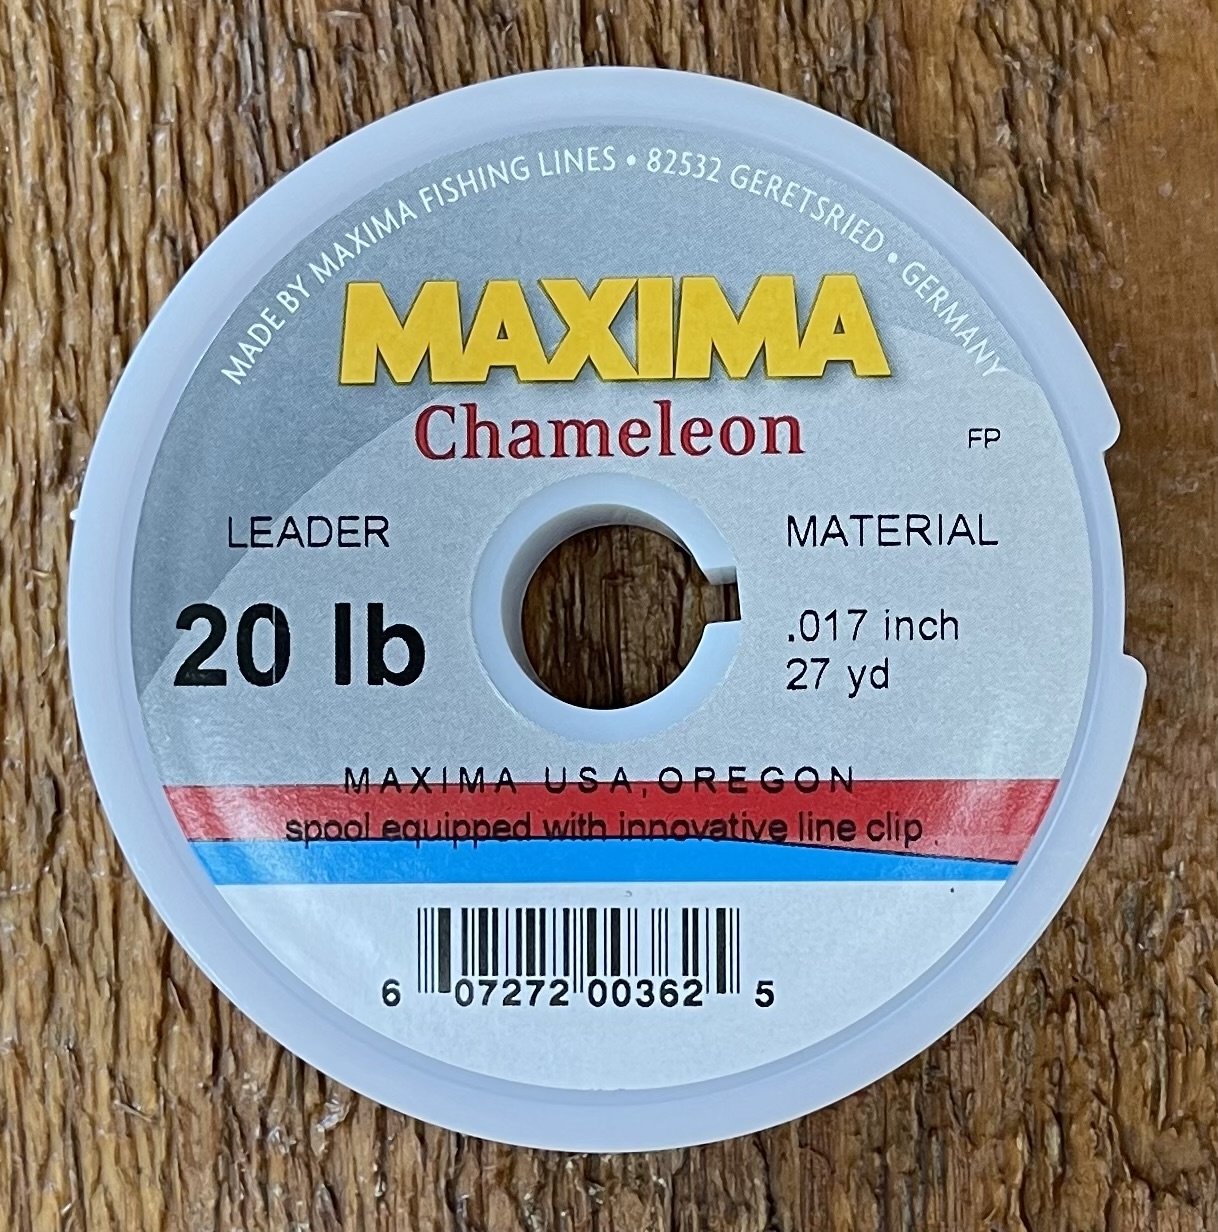 Maxima Chameleon Leader Material - Alps Store & Fishing Service